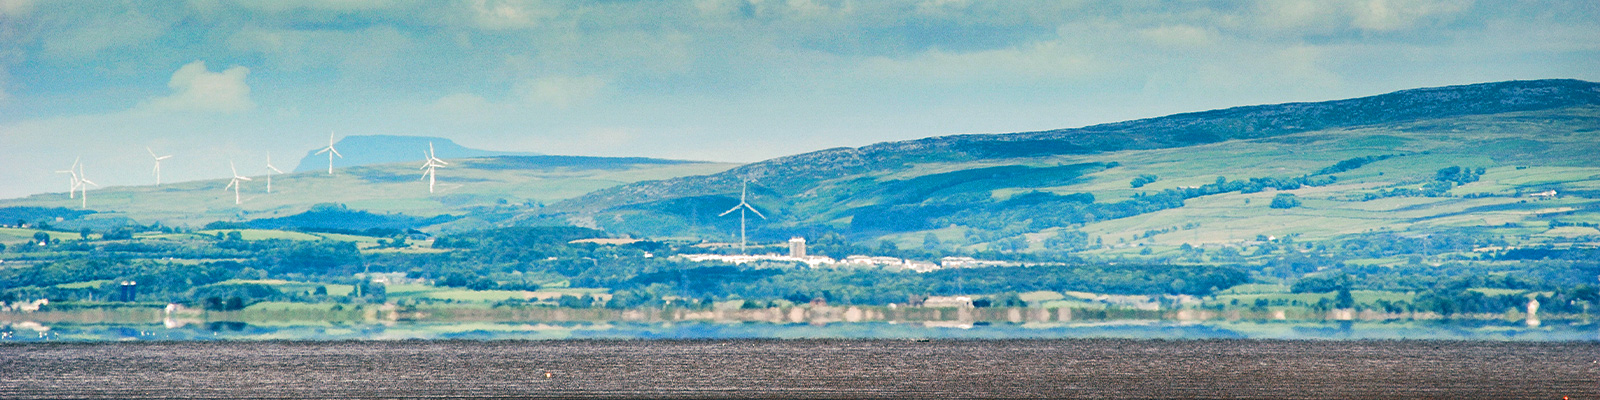 Looking across Morecambe Bay to Lancaster University